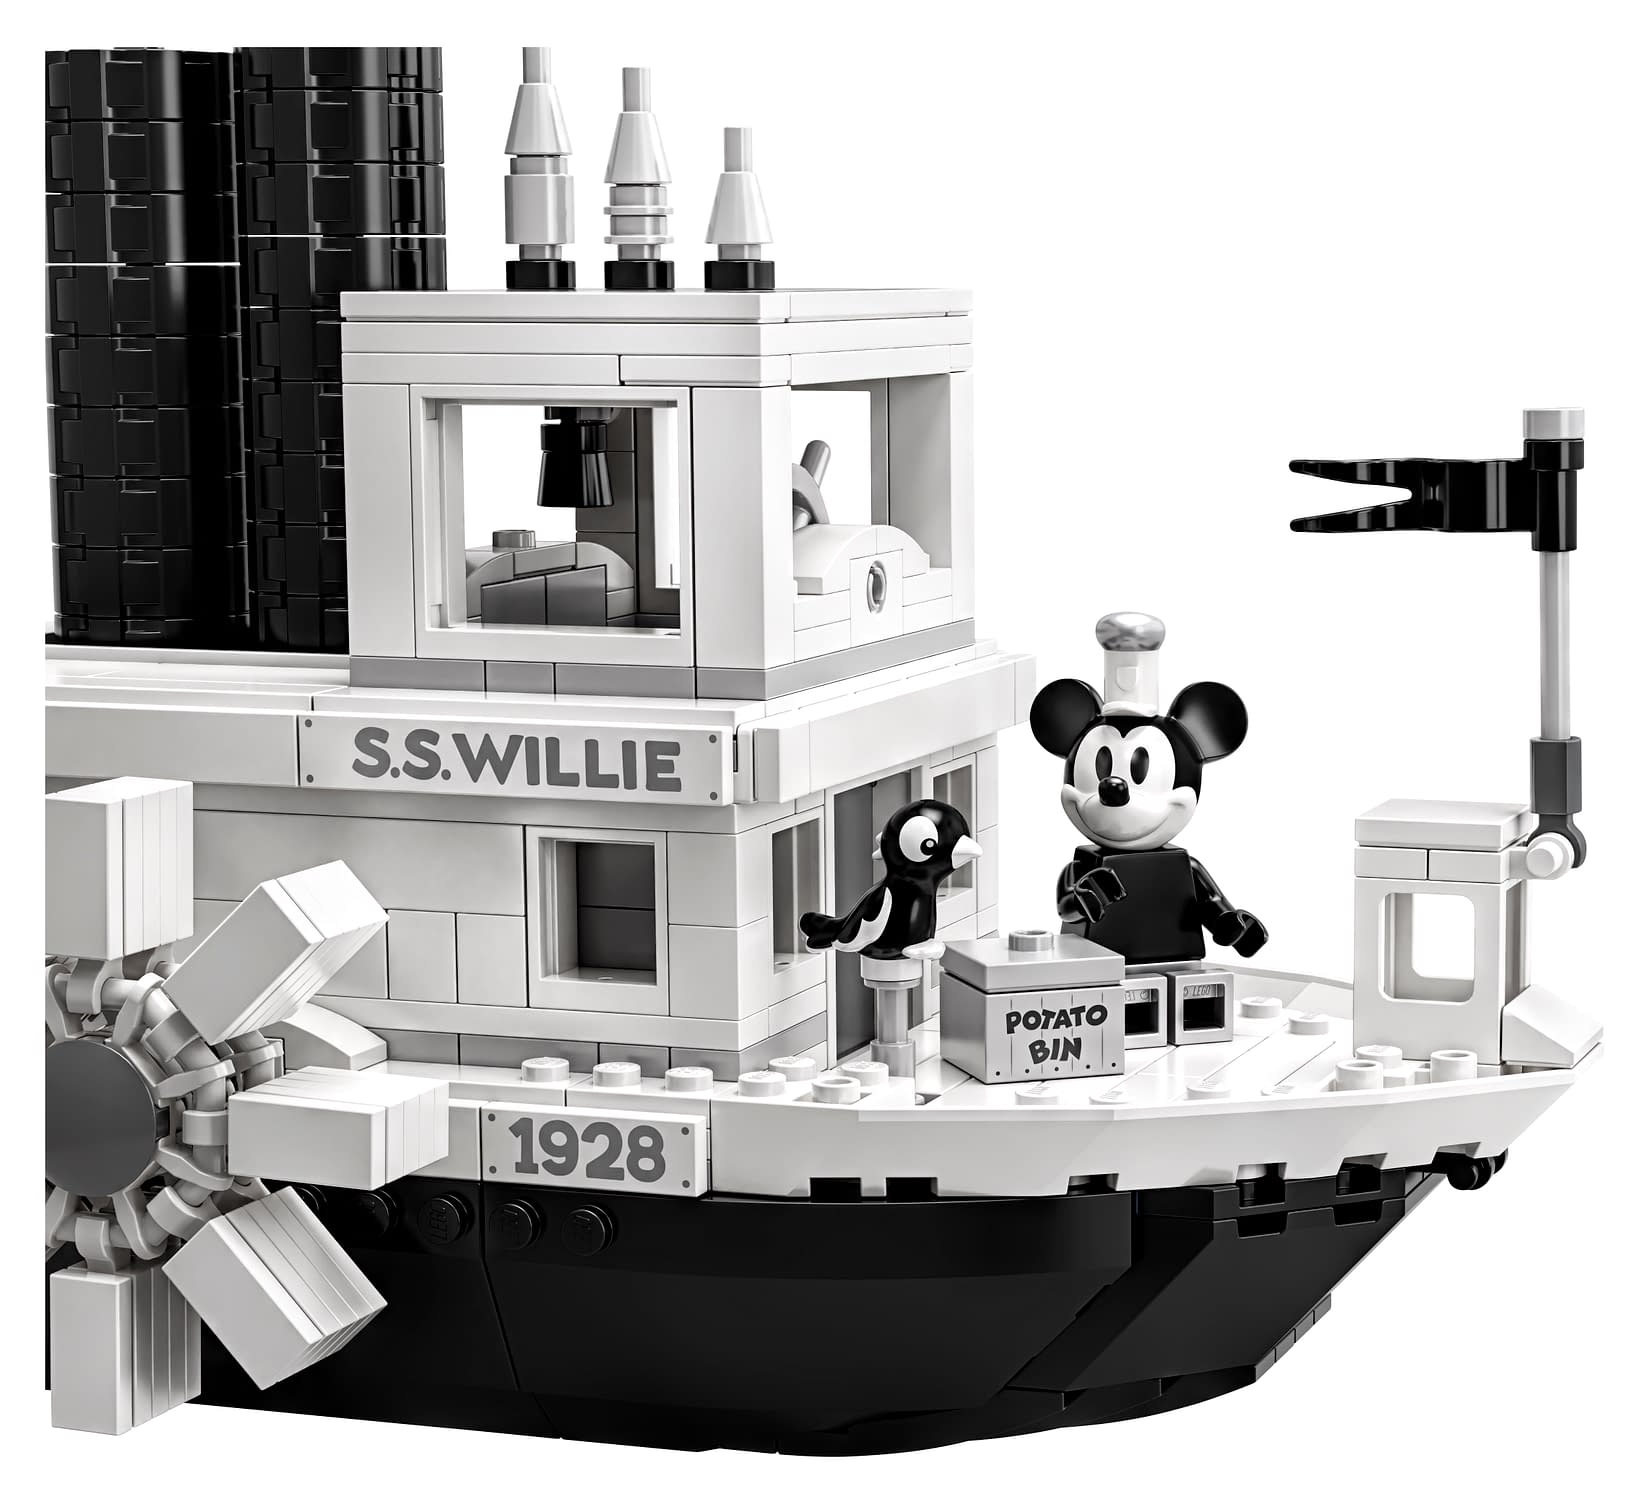 lego steamboat willie pre order